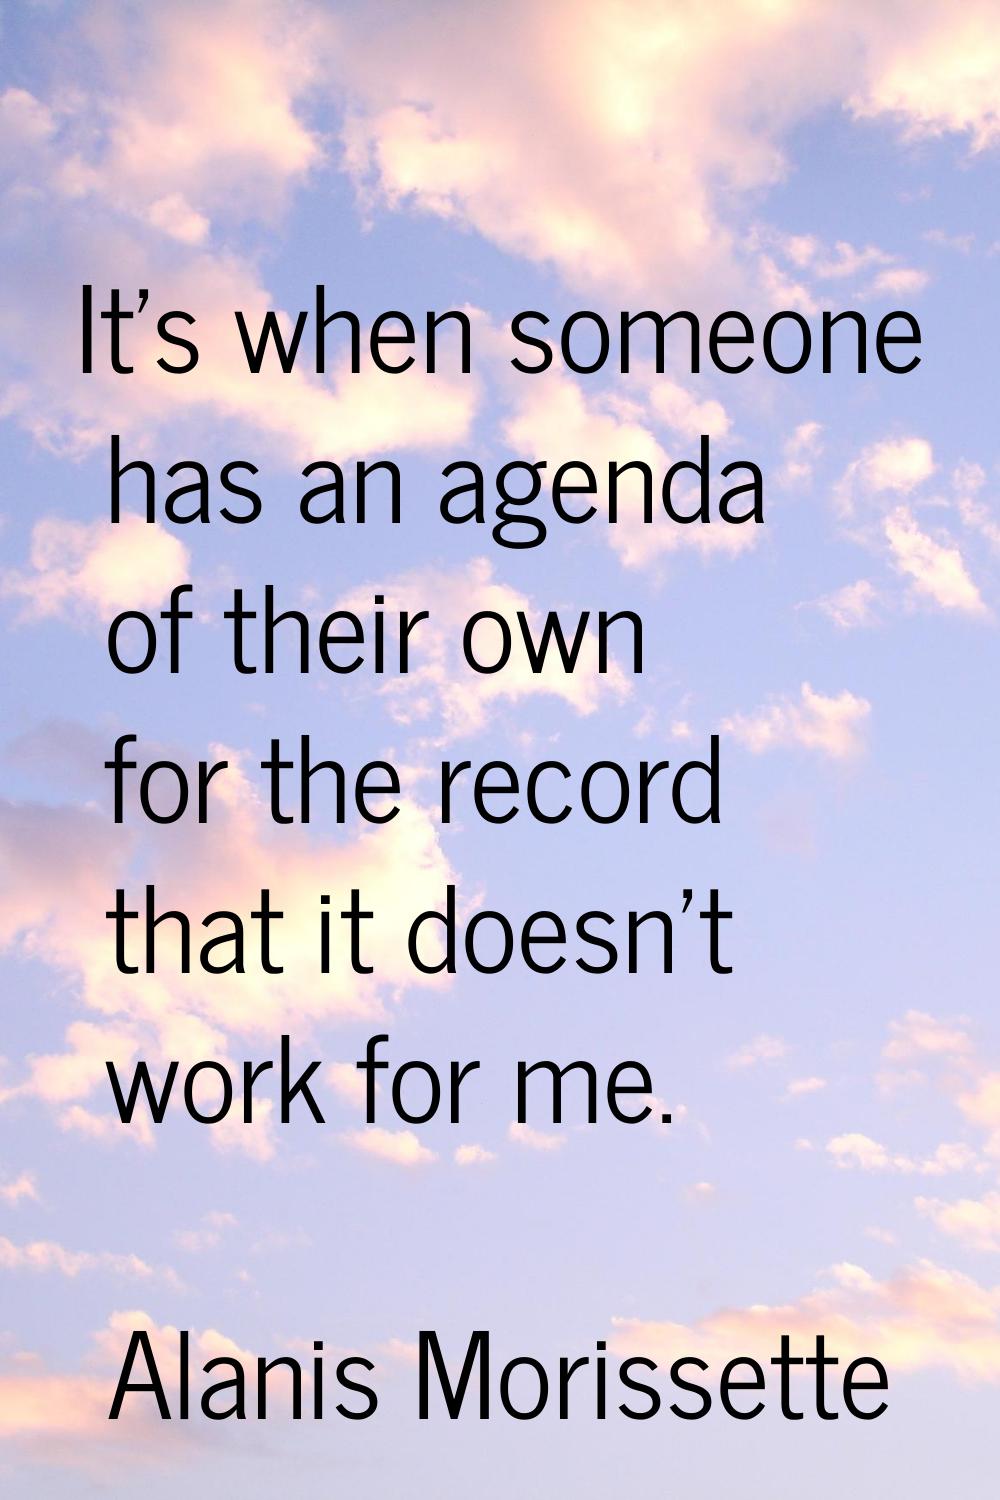 It's when someone has an agenda of their own for the record that it doesn't work for me.